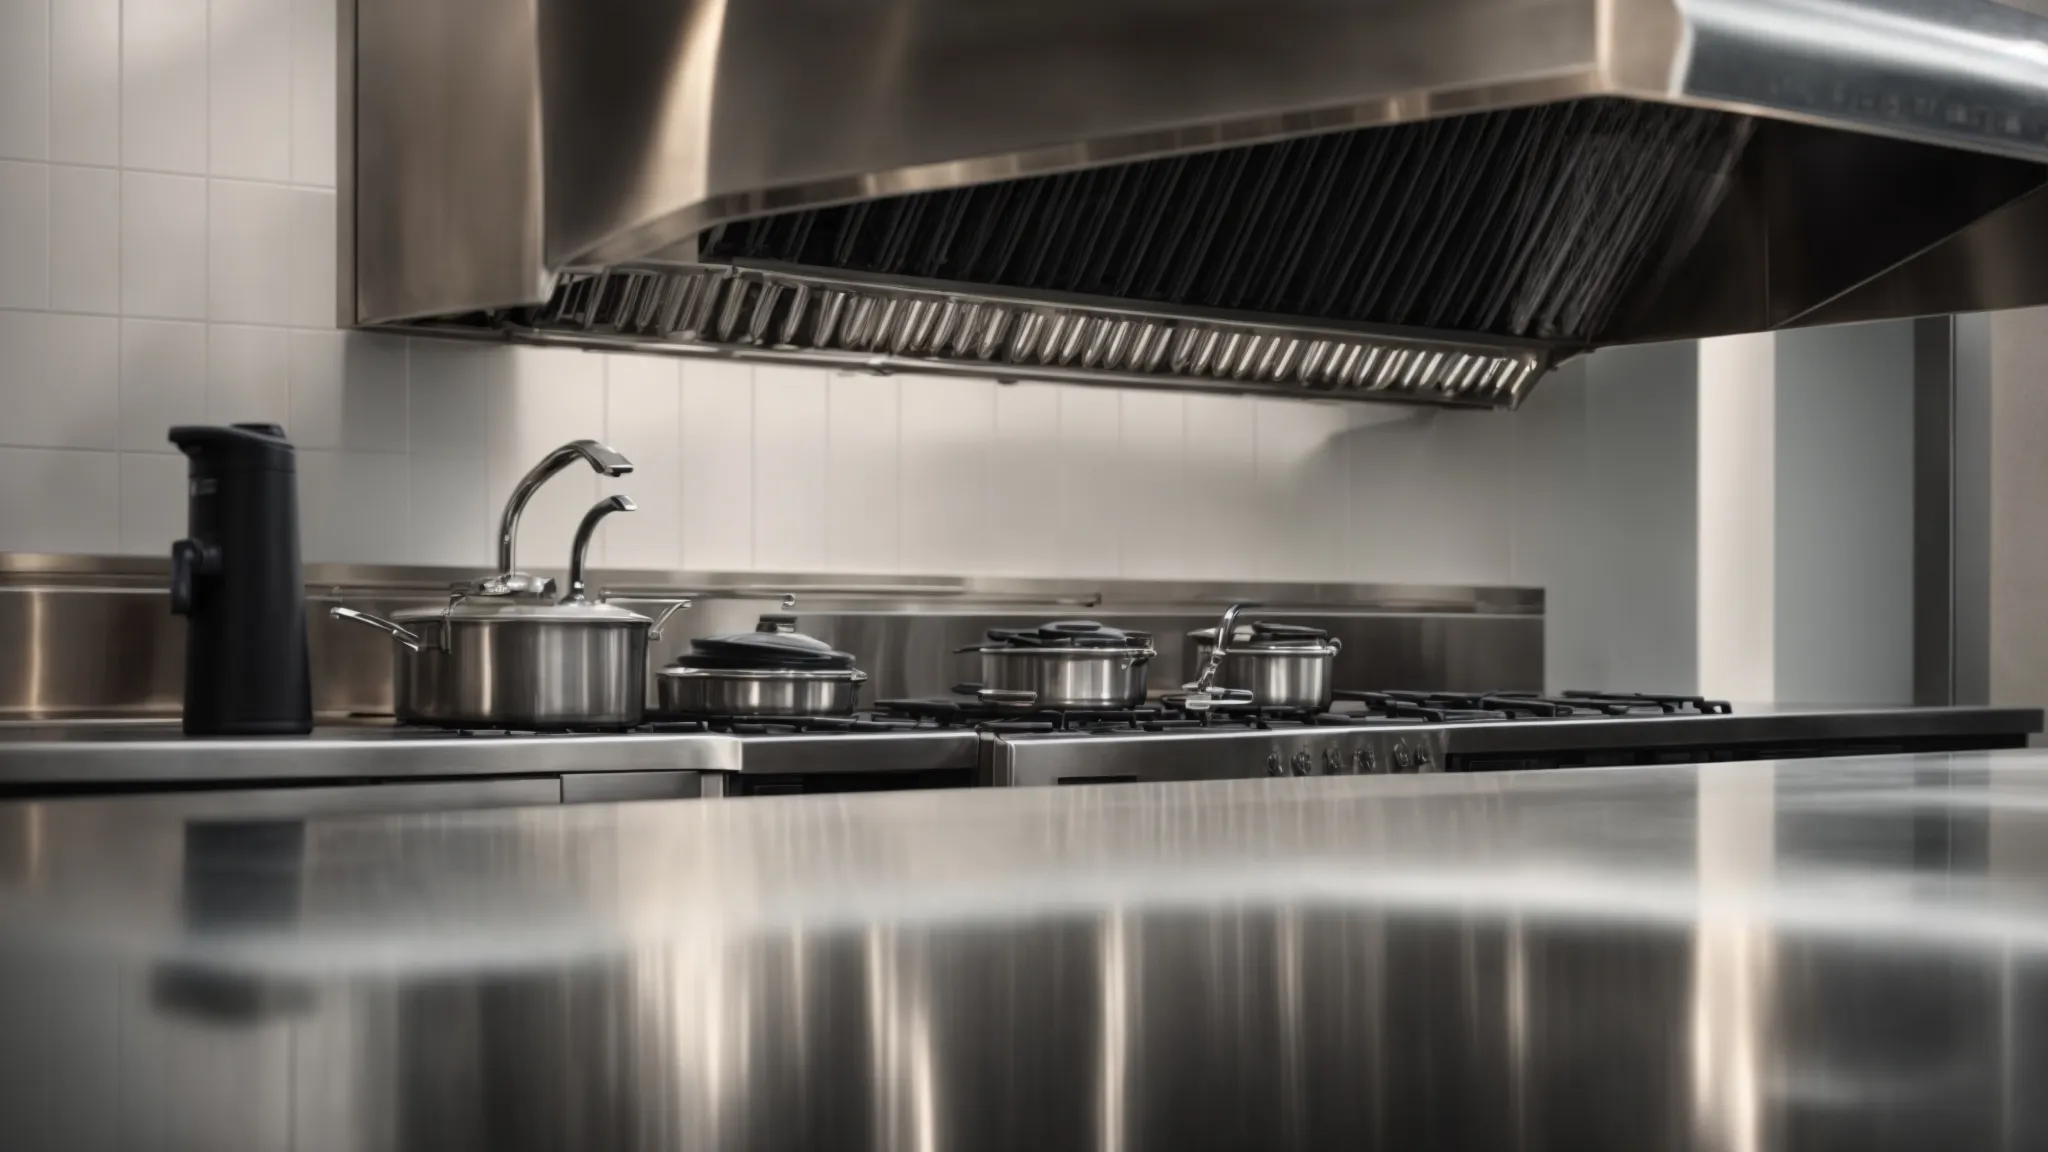 a kitchen hood transitions from grimy to gleaming under the skilled hands of professional cleaners.